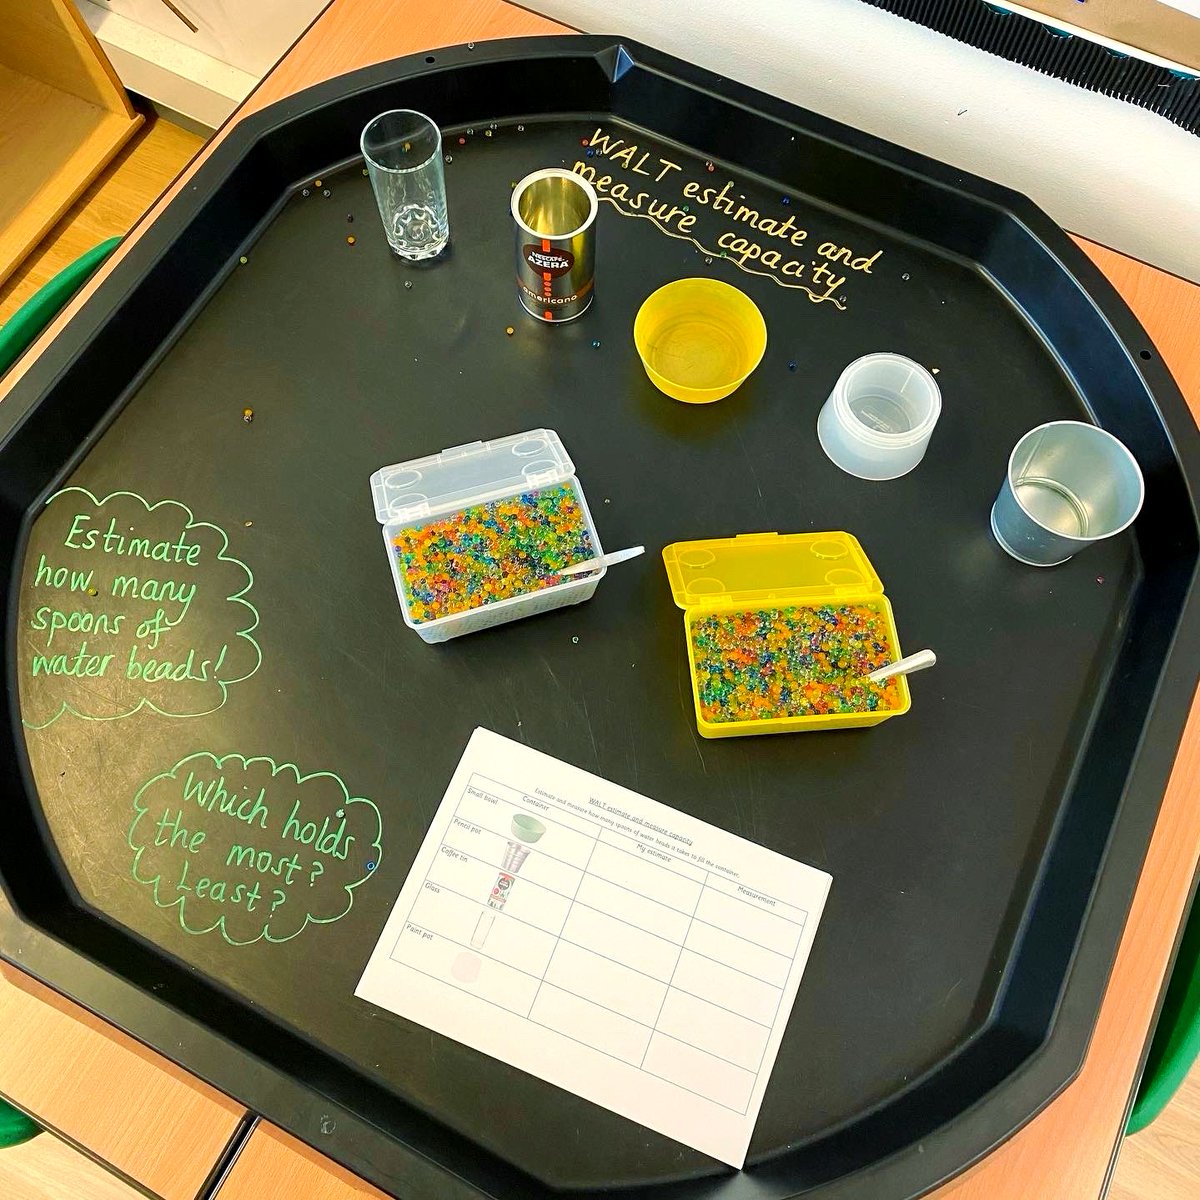 Wouldn't you love to play with this tuff tray?! 😍

#primaryschoolteacher #primaryteachers #primaryteacherlife #primaryteacheruk #ukteacher #year1teacher #ks1teacher #year1 #iteachyear1 #bonfireart #mathstufftray #tufftray #mathsobjectives #mathslearning #primarystarseducation